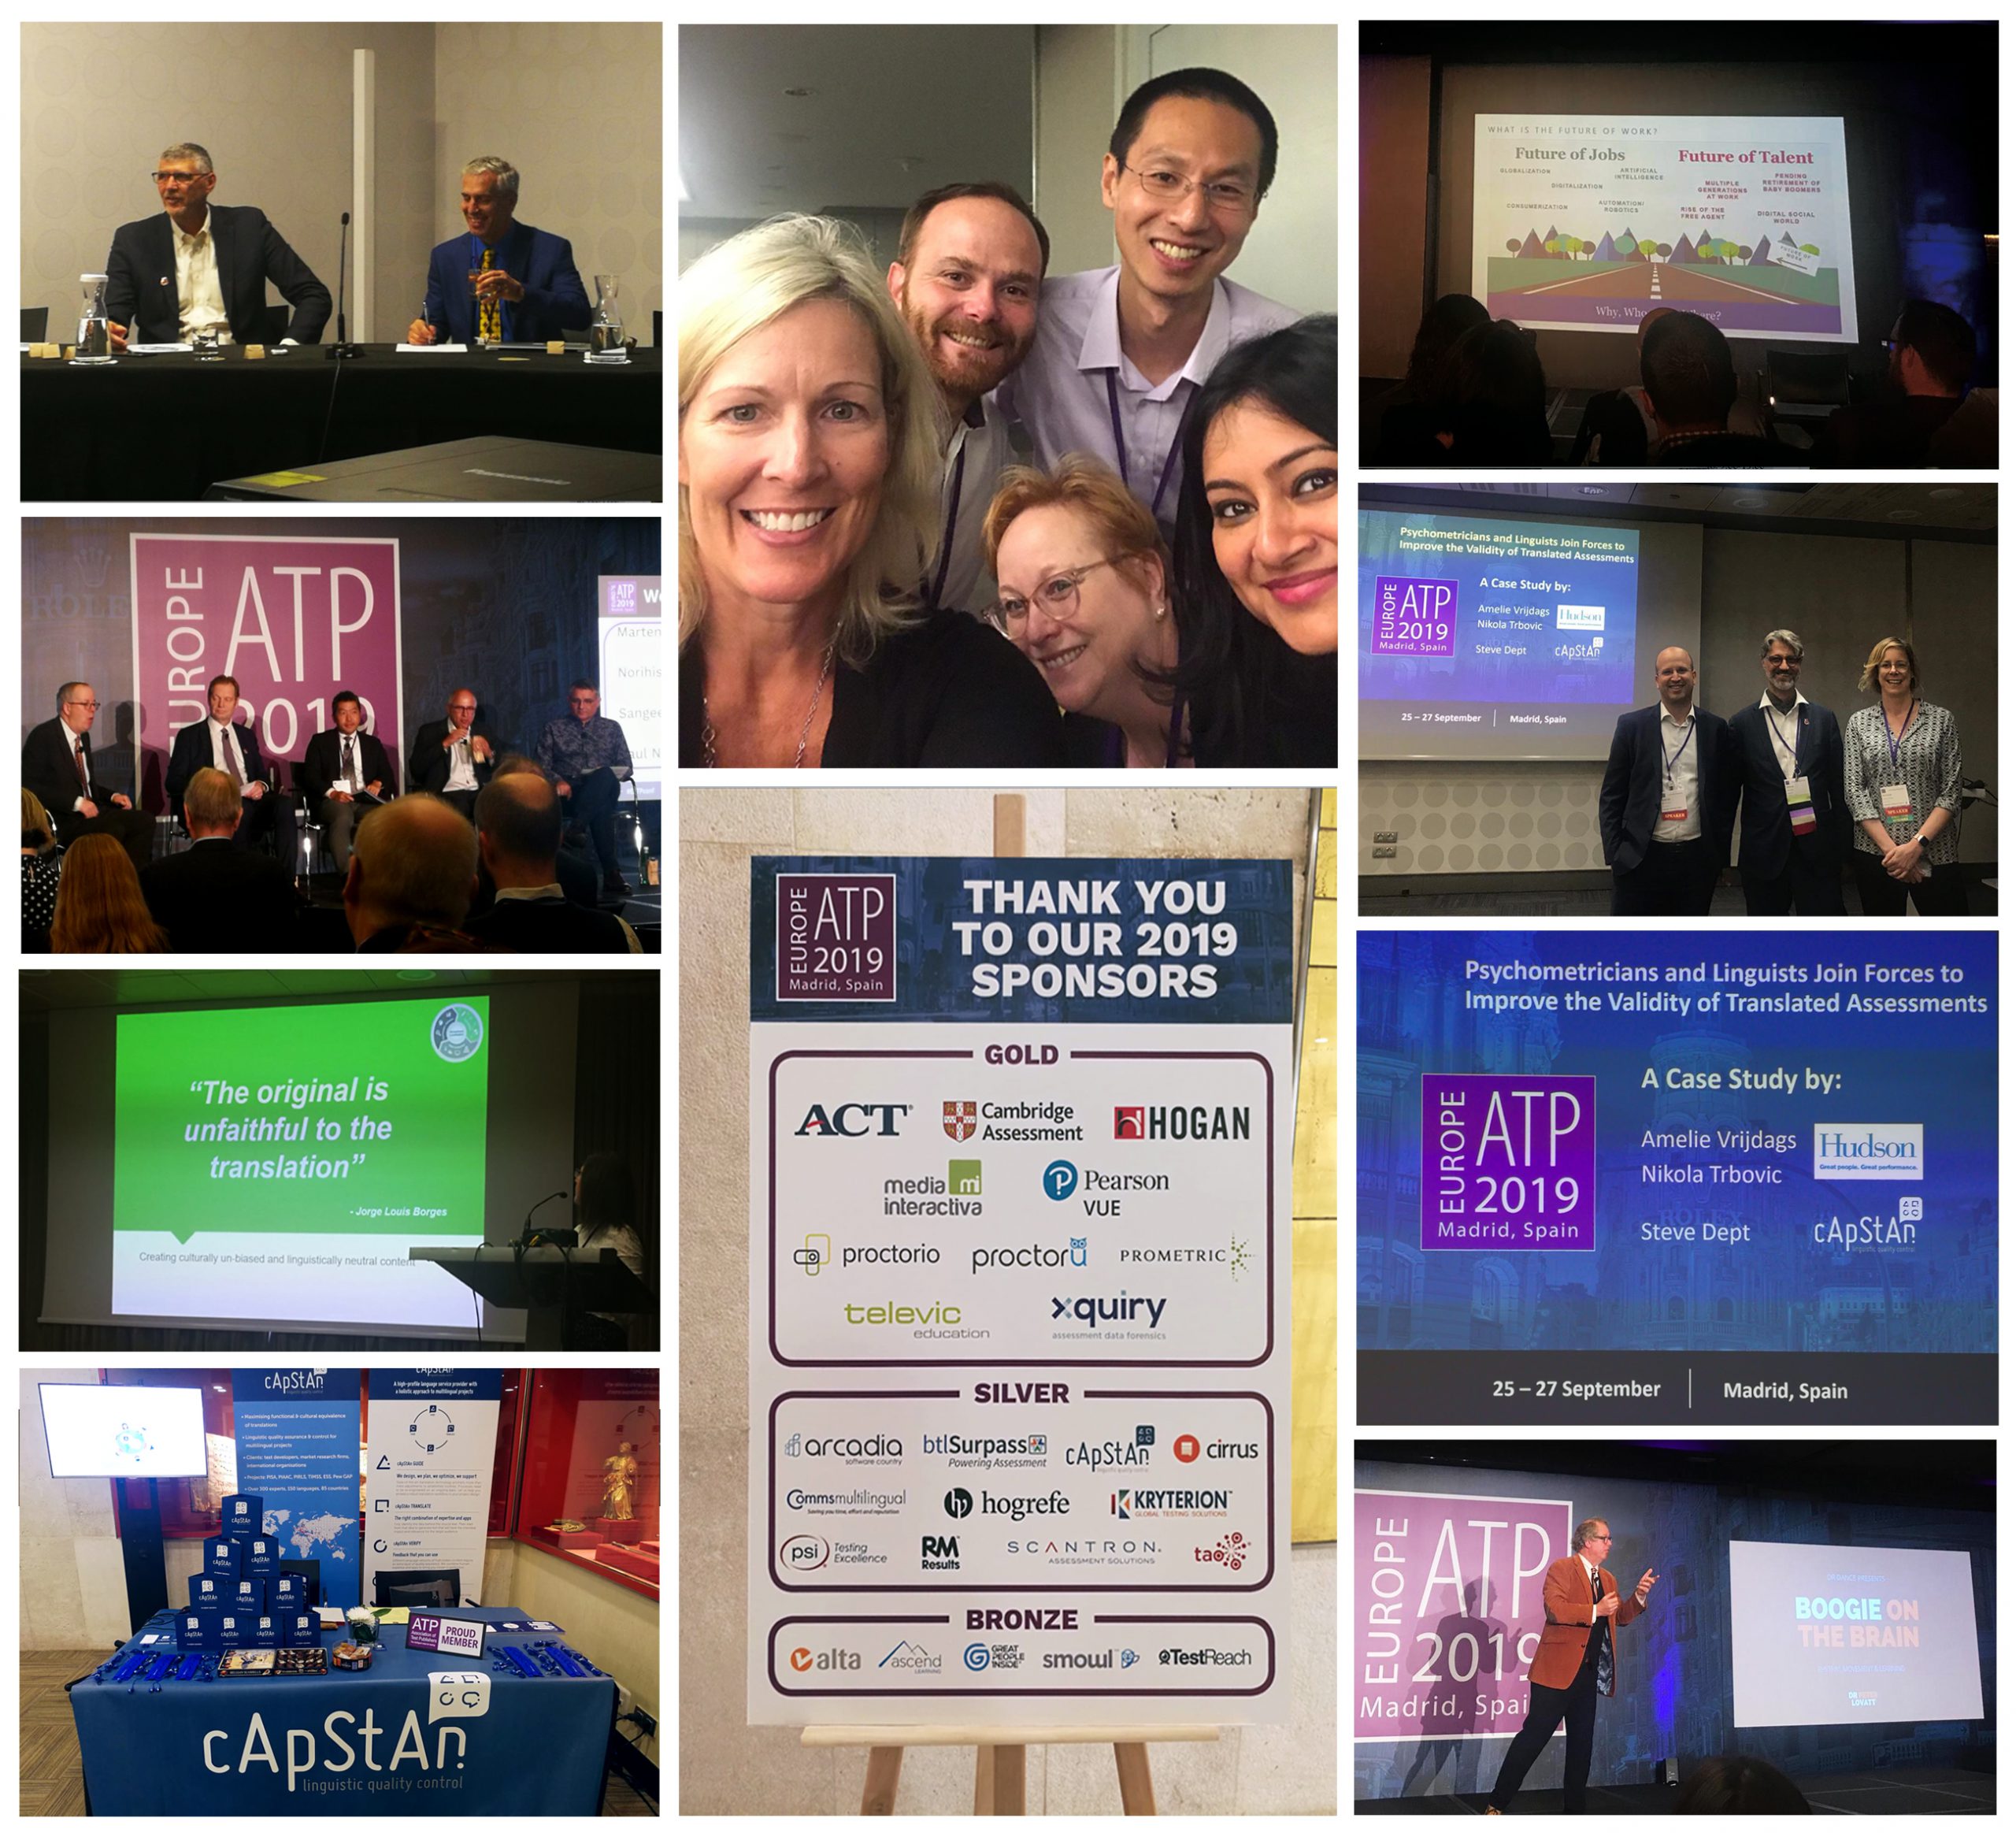 Highlights from the E-ATP Conference in Madrid